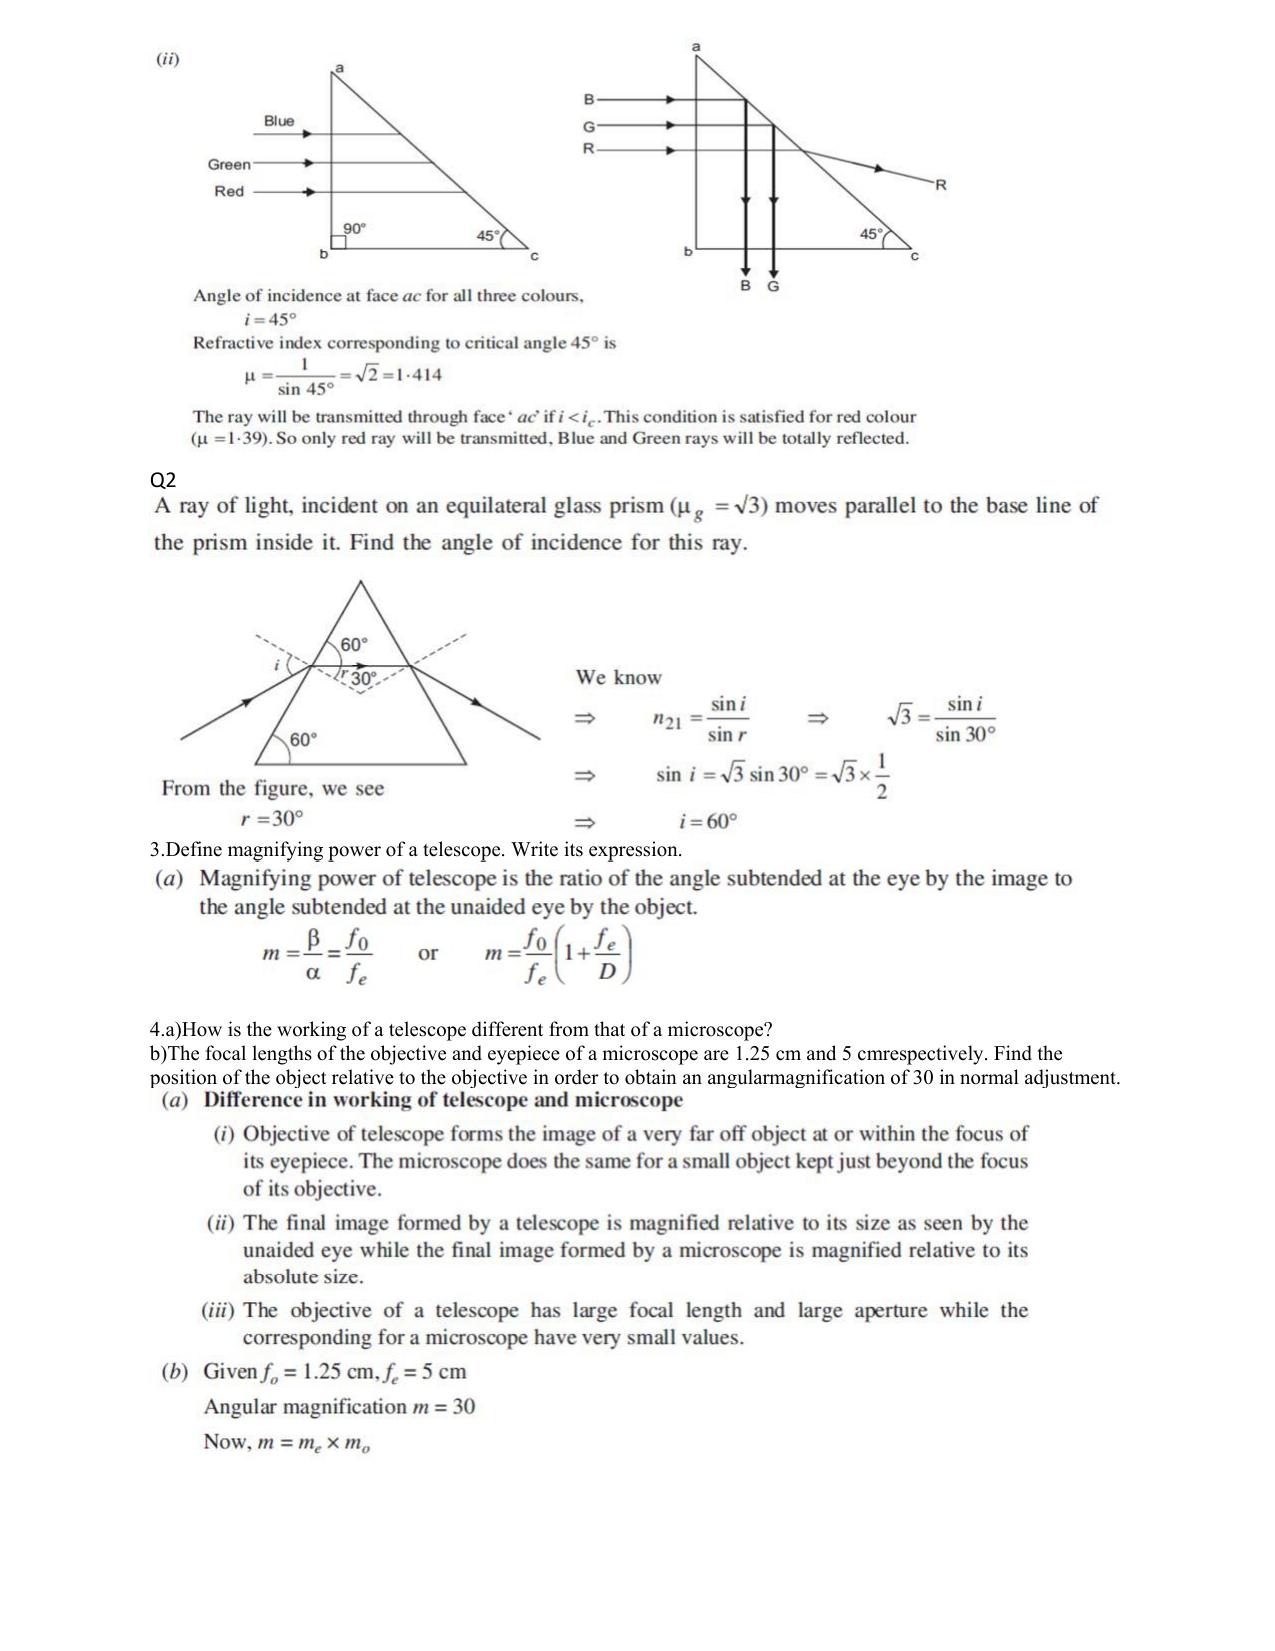 CBSE Class 12 Physics Worksheets for Optics - Page 6